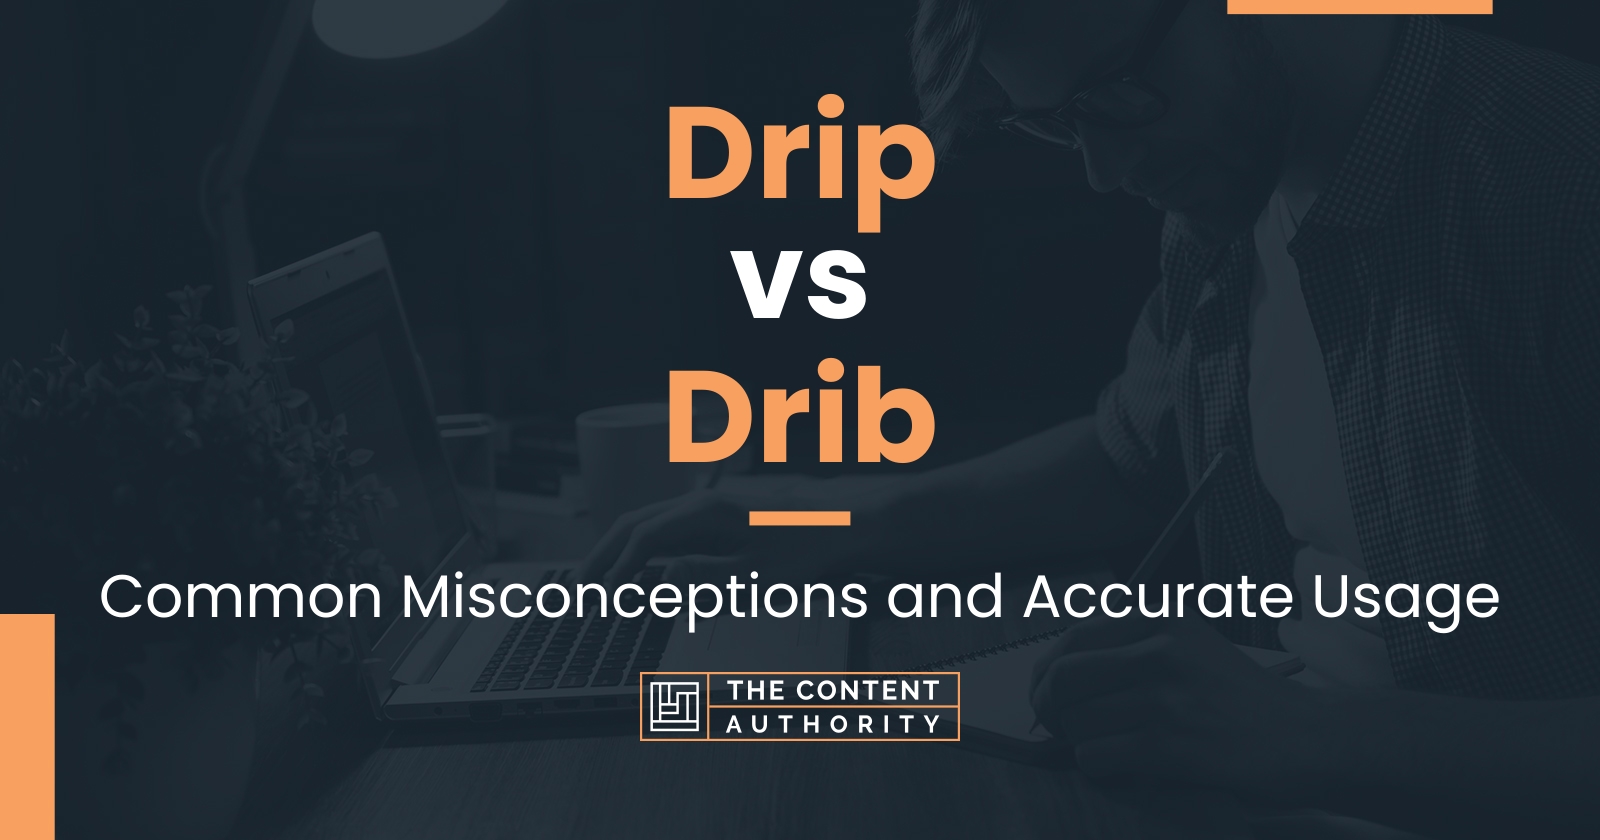 Drip vs Drib: Common Misconceptions and Accurate Usage